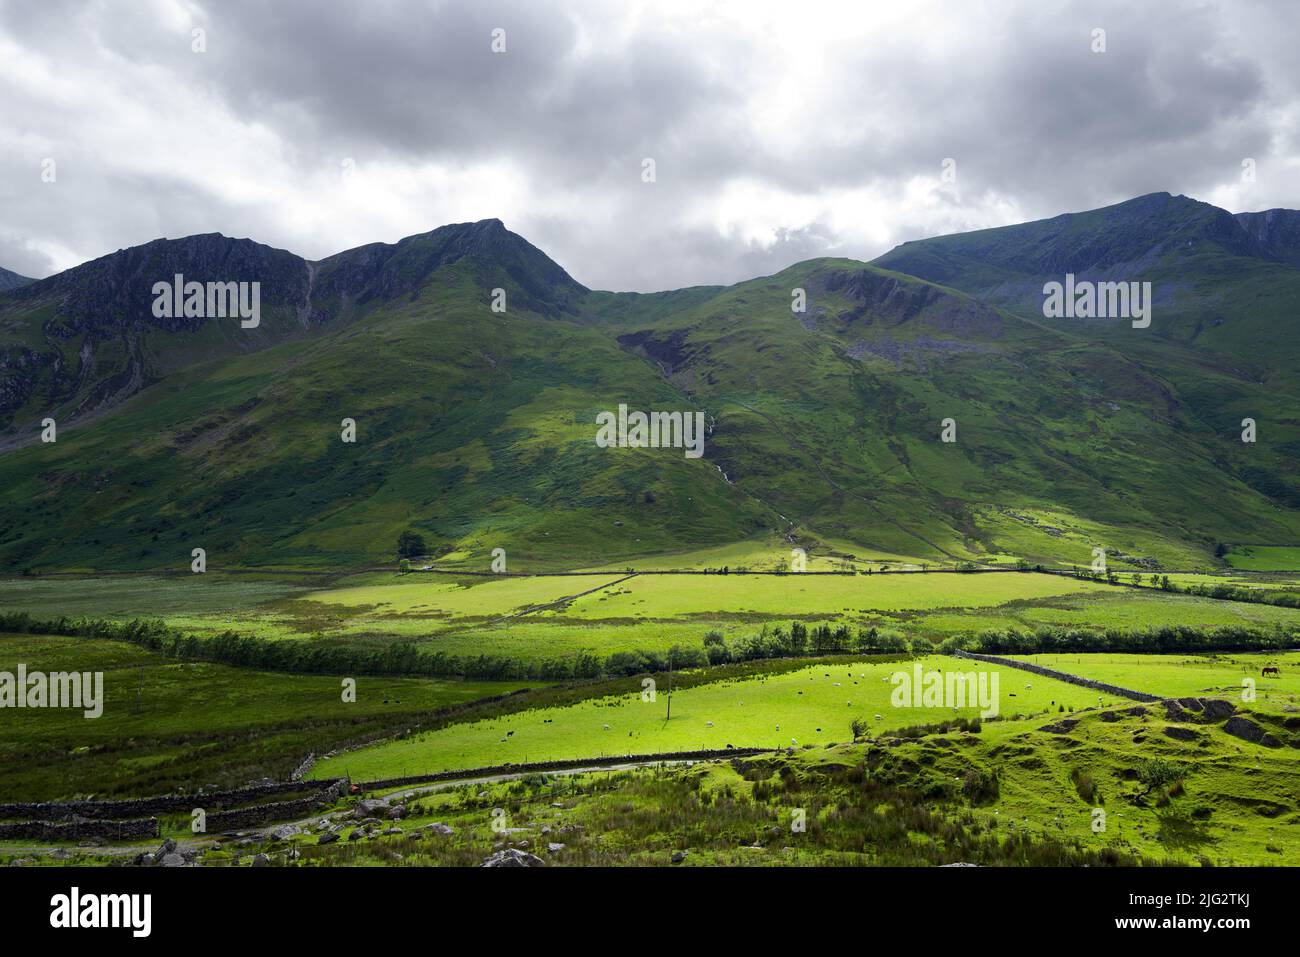 Nant Ffrancon is a steep-sided glacial valley between the Glyderau and the Carneddau mountain ranges in Snowdonia. Foel Goch is in the background. Stock Photo